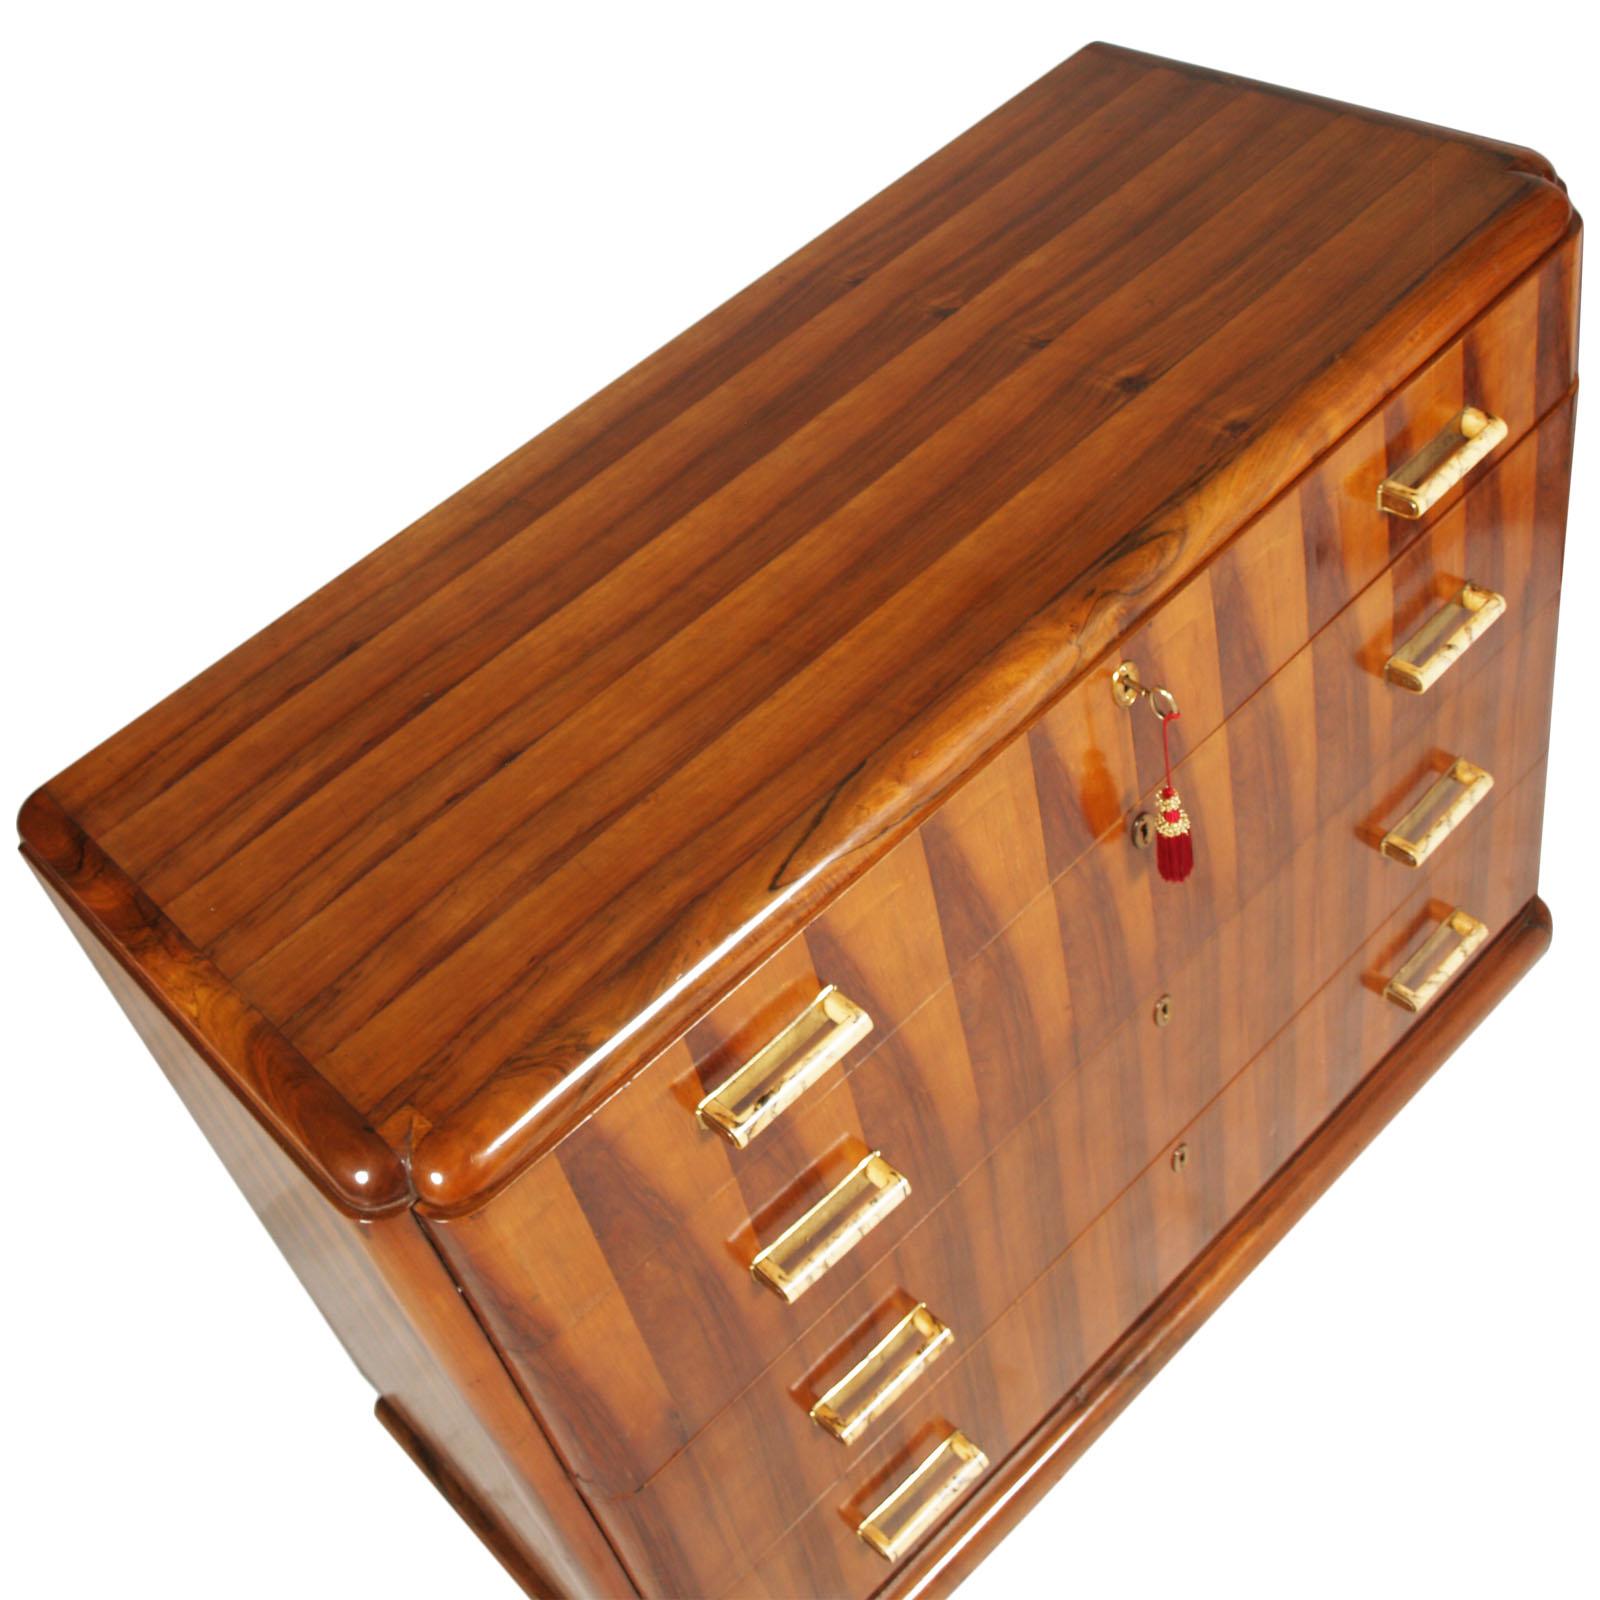 Early 20th century Art Deco commode, chest of drawers, all massive wood, walnut veneered, attributable to Gio Ponti designer for Meroni & Fossati, Lissone-Milan.
Very elegant and rare dresser with precious handles in brass and bakelite,  with